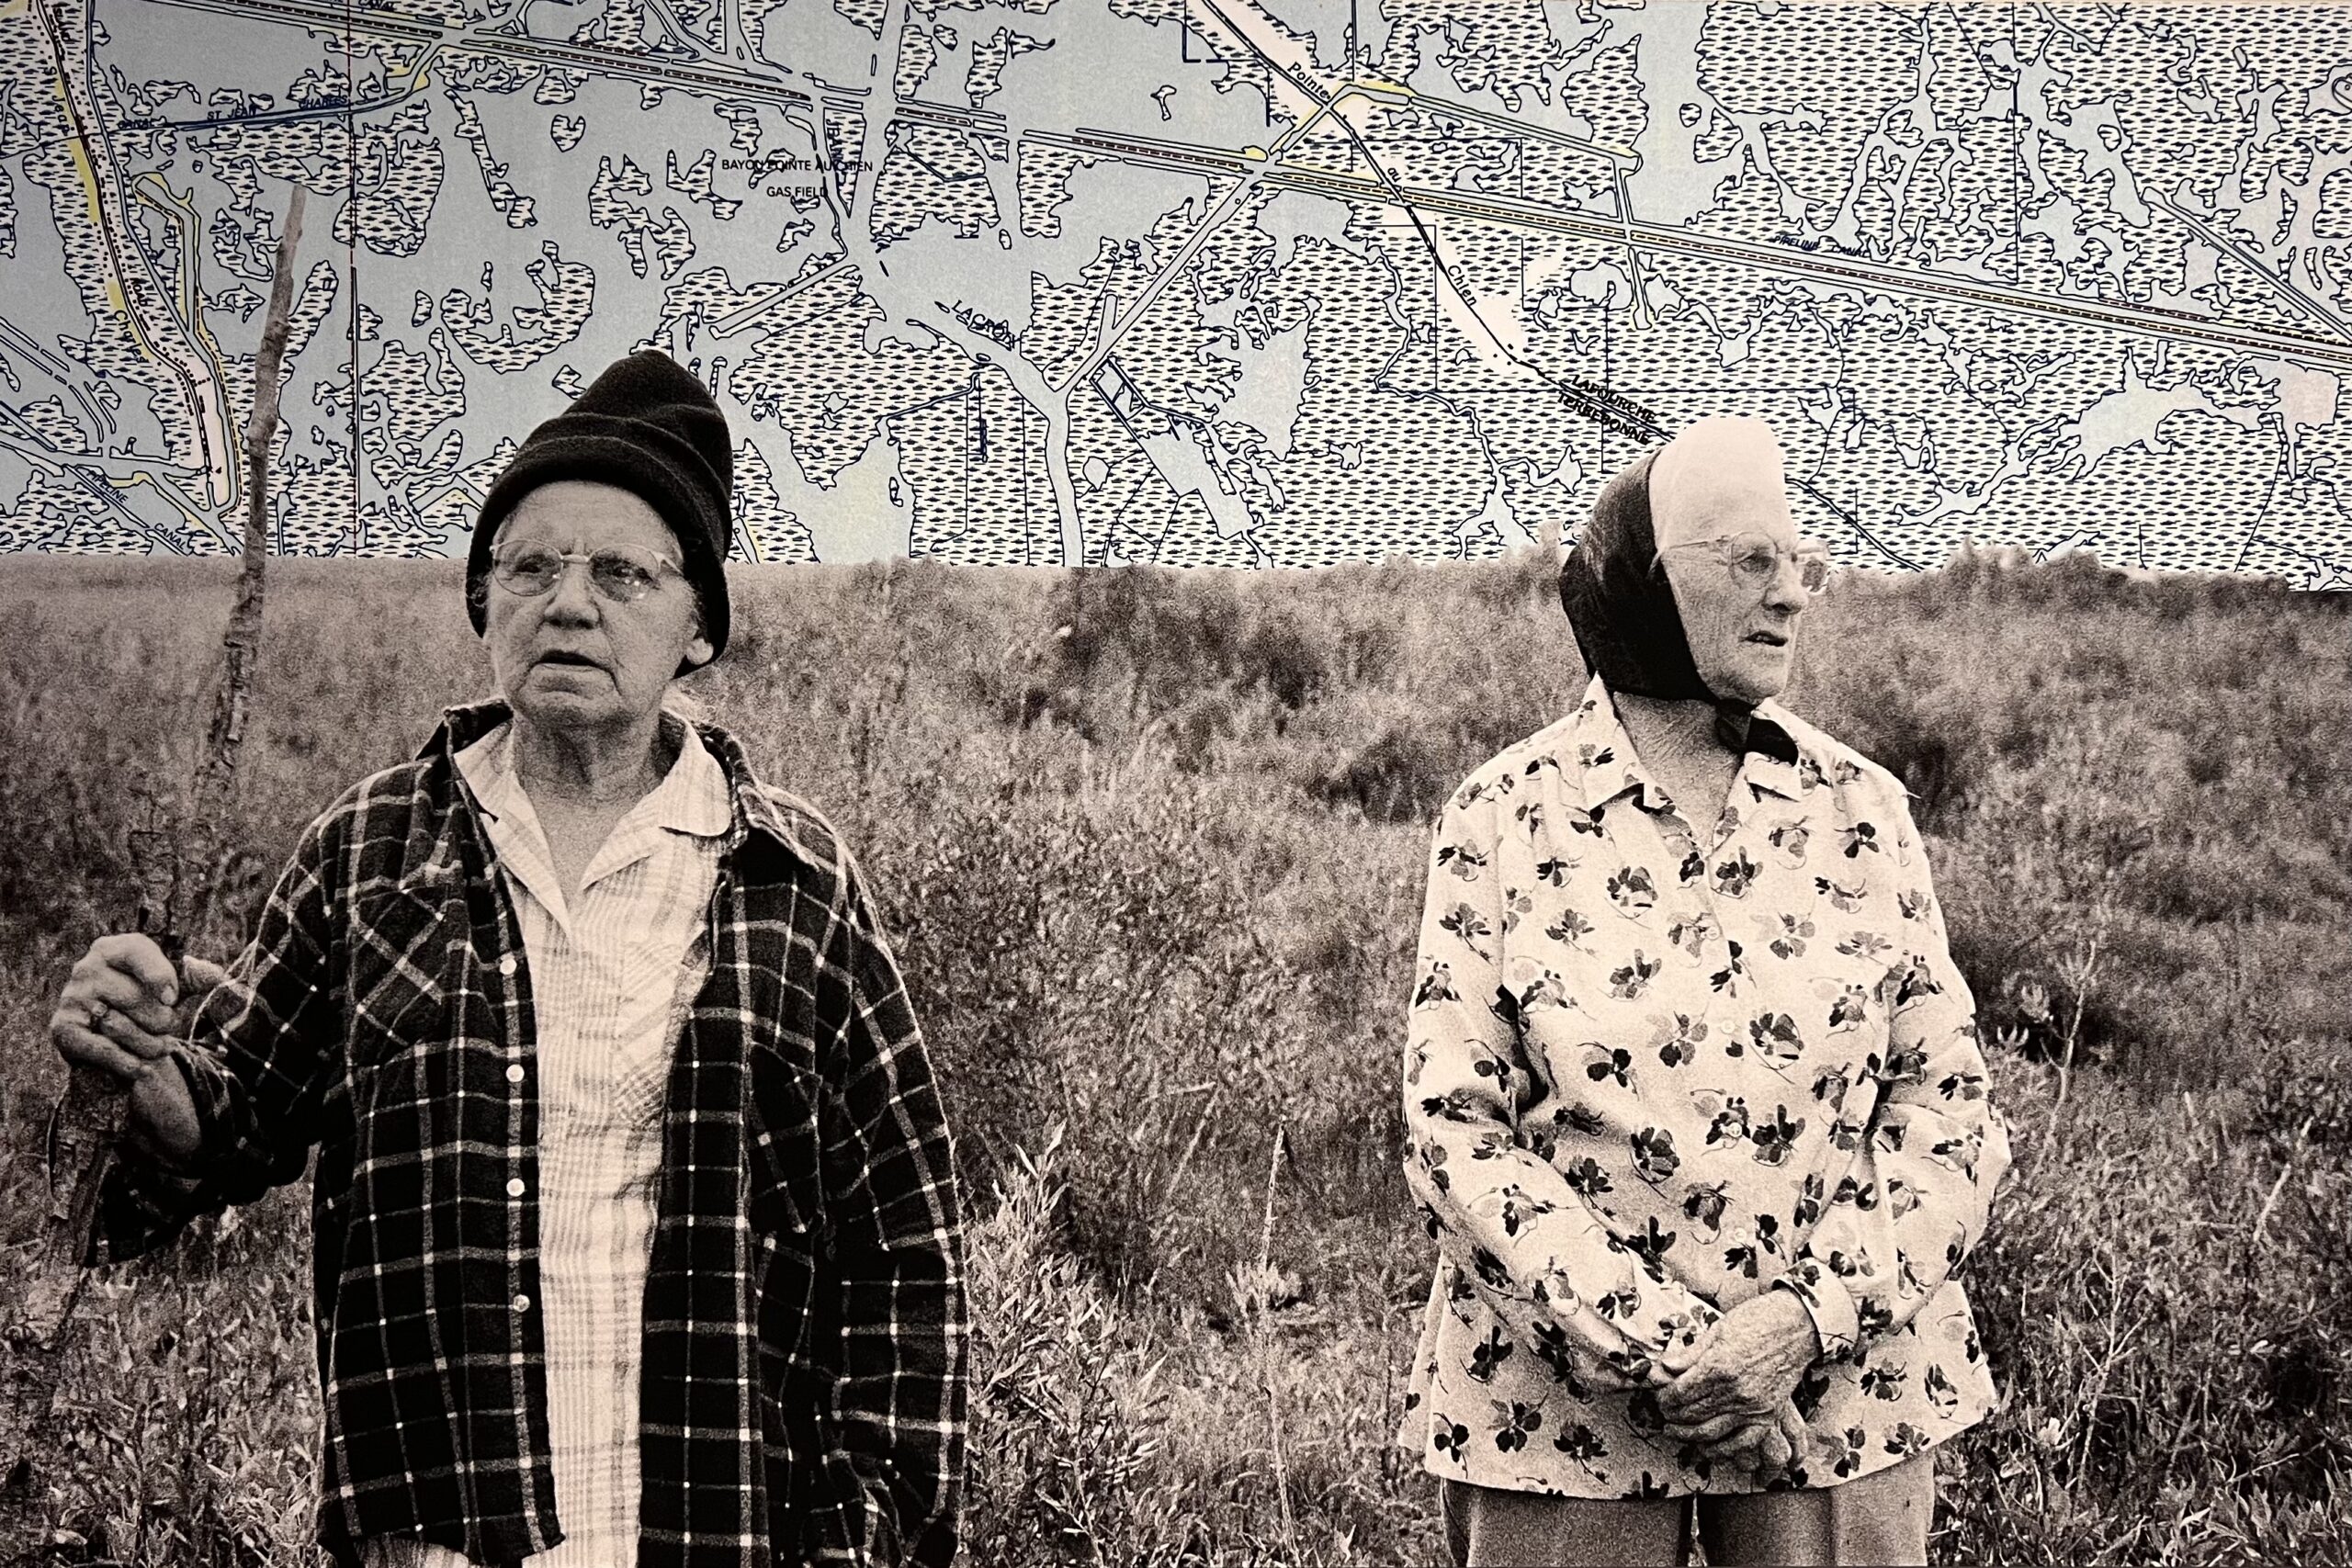 An assemblage piece consisting of a photograph of two people standing in a field, with a map of Lake Bully where the sky would normally be.